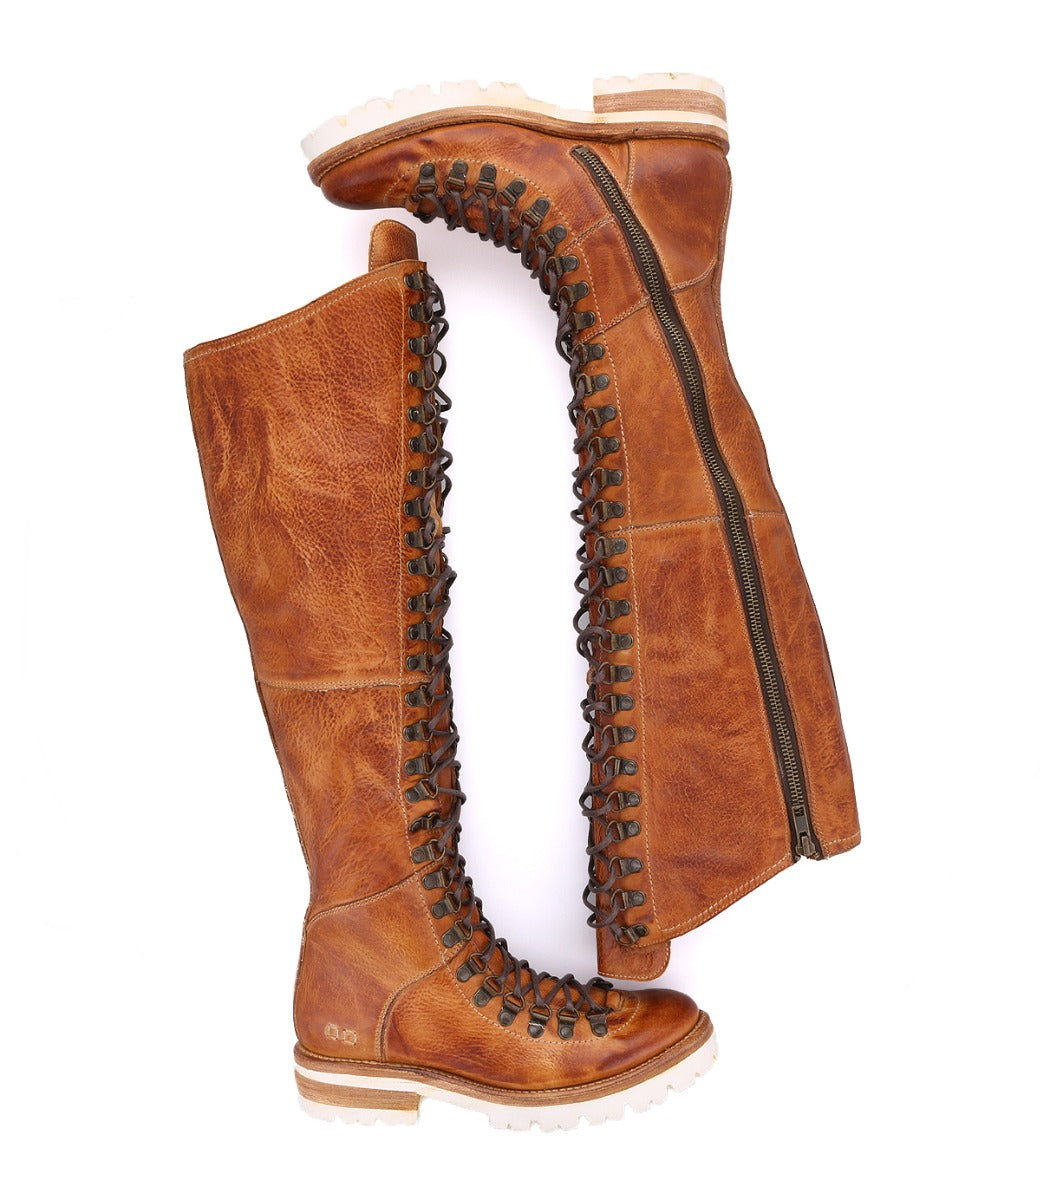 A pair of Lustrous brown leather boots with laces from Bed Stu.